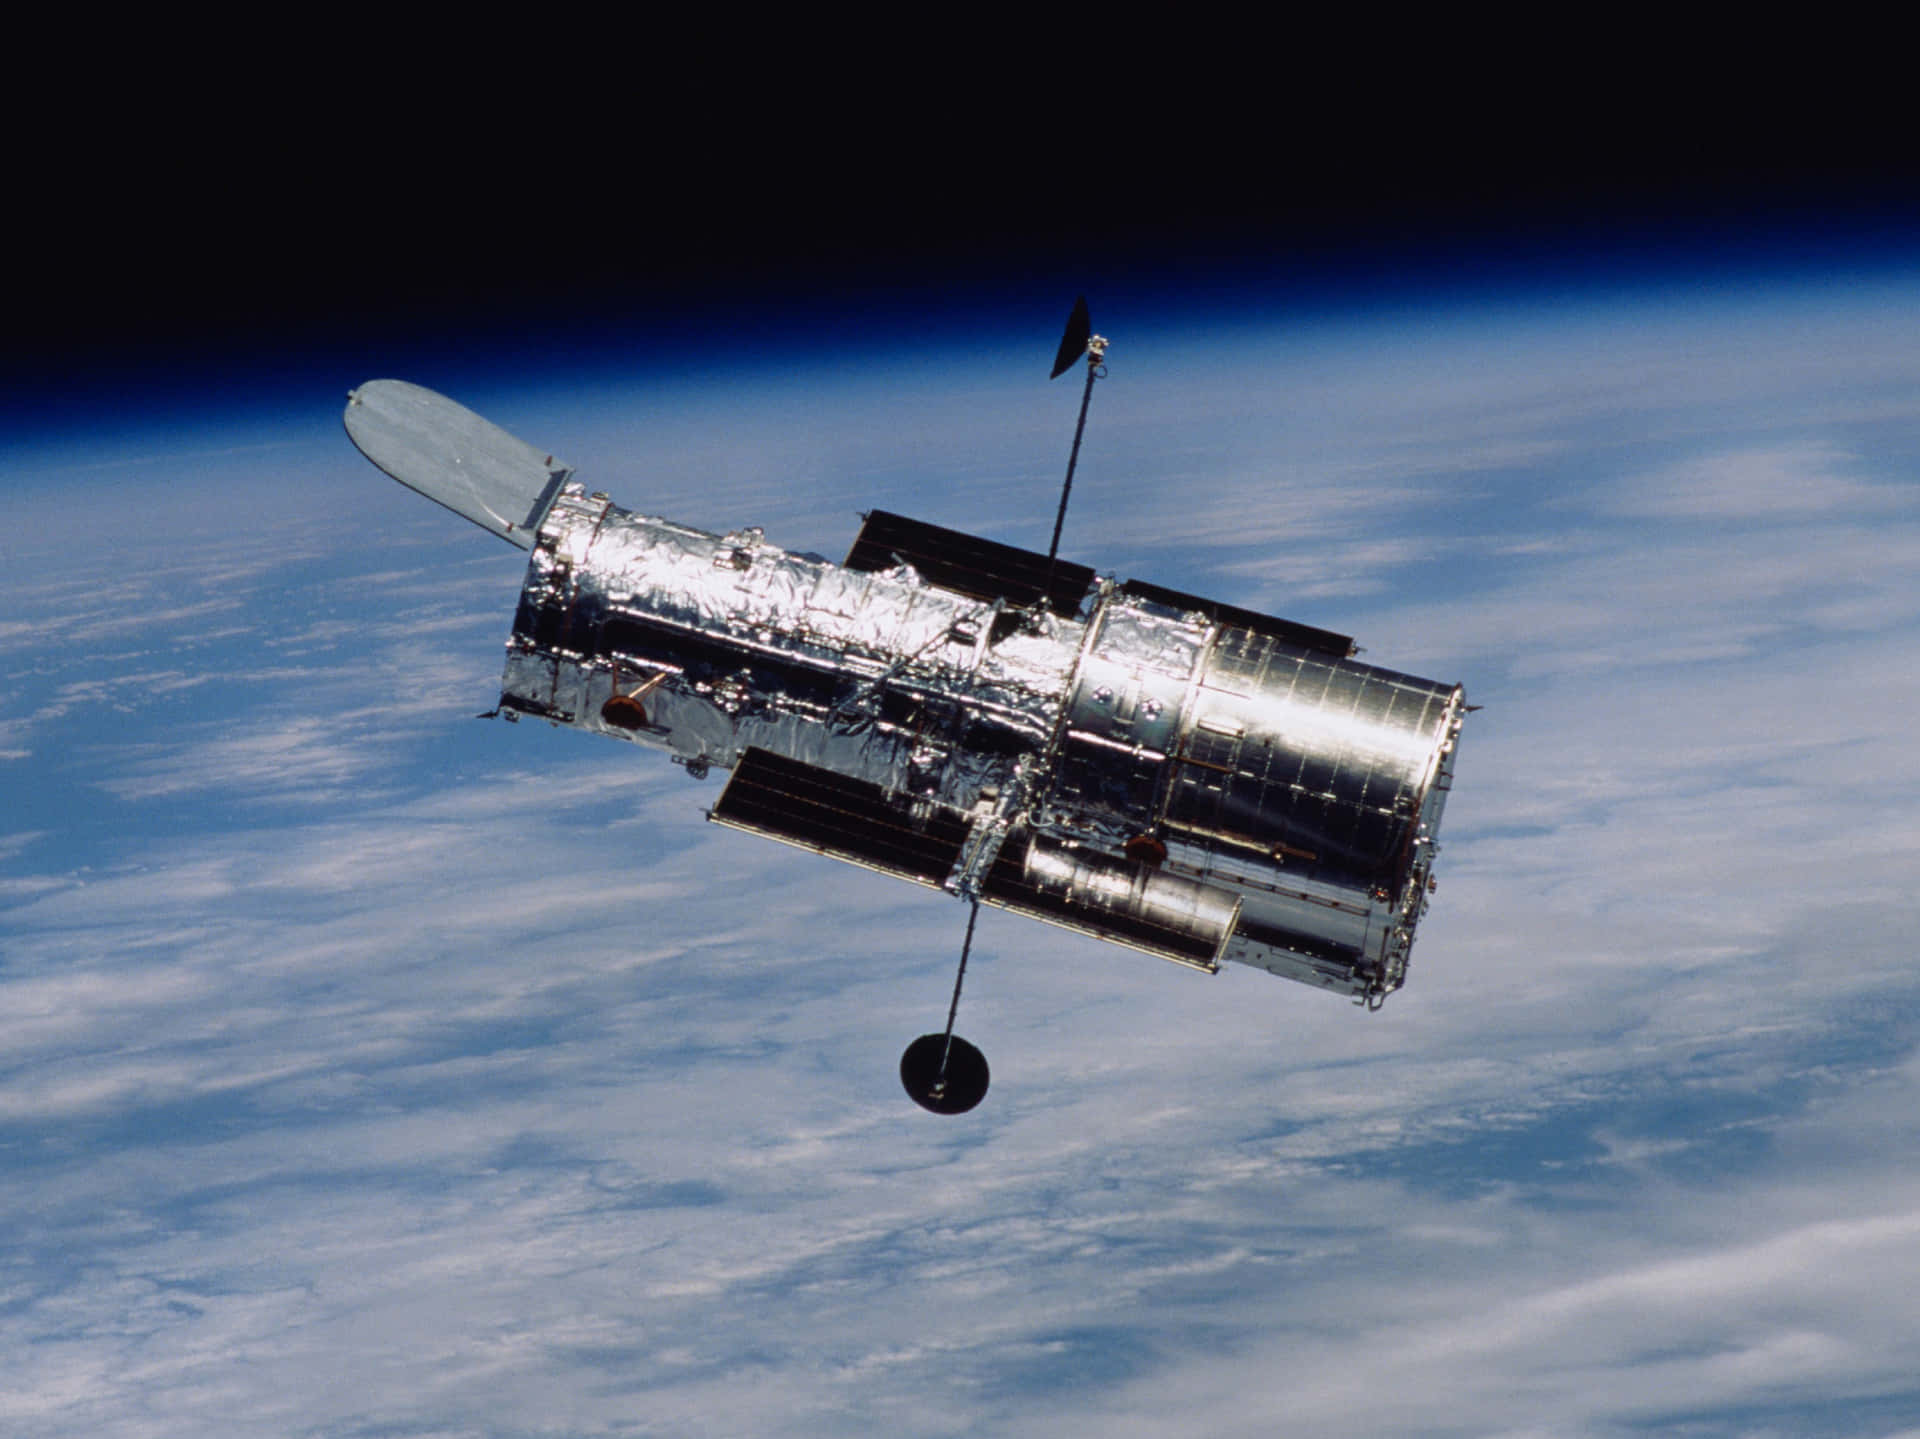 Hubble Space Telescope capturing the mind-blowing view of the universe. Wallpaper